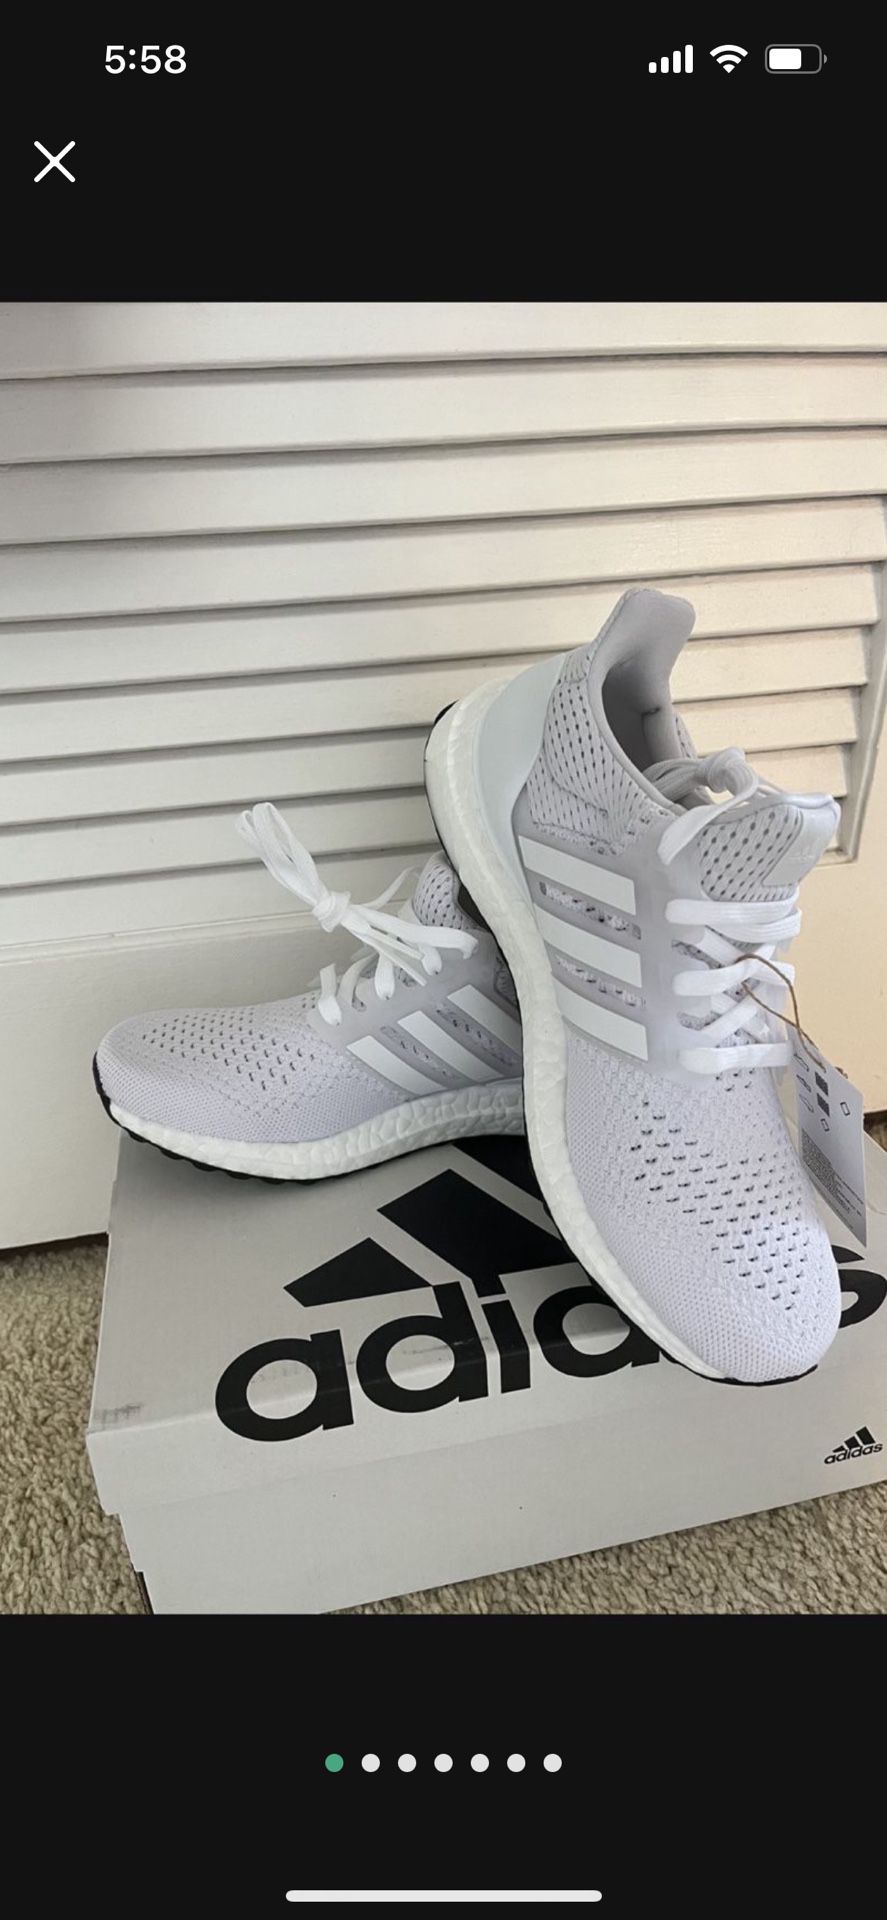 ADIDAS Women's UltraBOOST 1.0 Running Sneakers from Finish Line. Sz 6.5